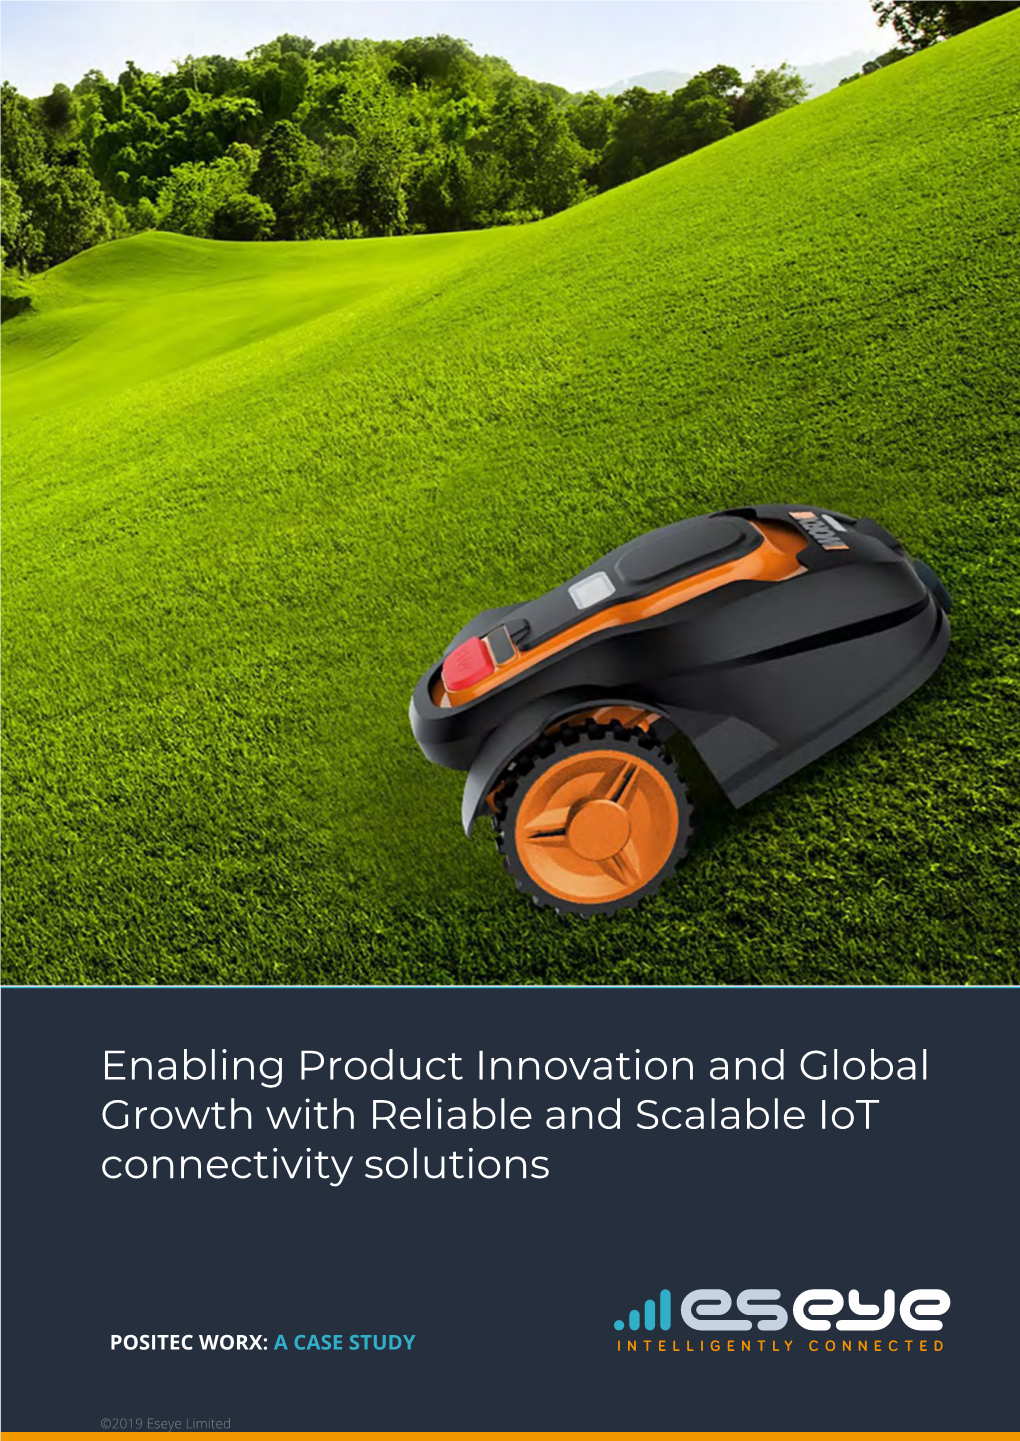 Enabling Product Innovation and Global Growth with Reliable and Scalable Iot Connectivity Solutions